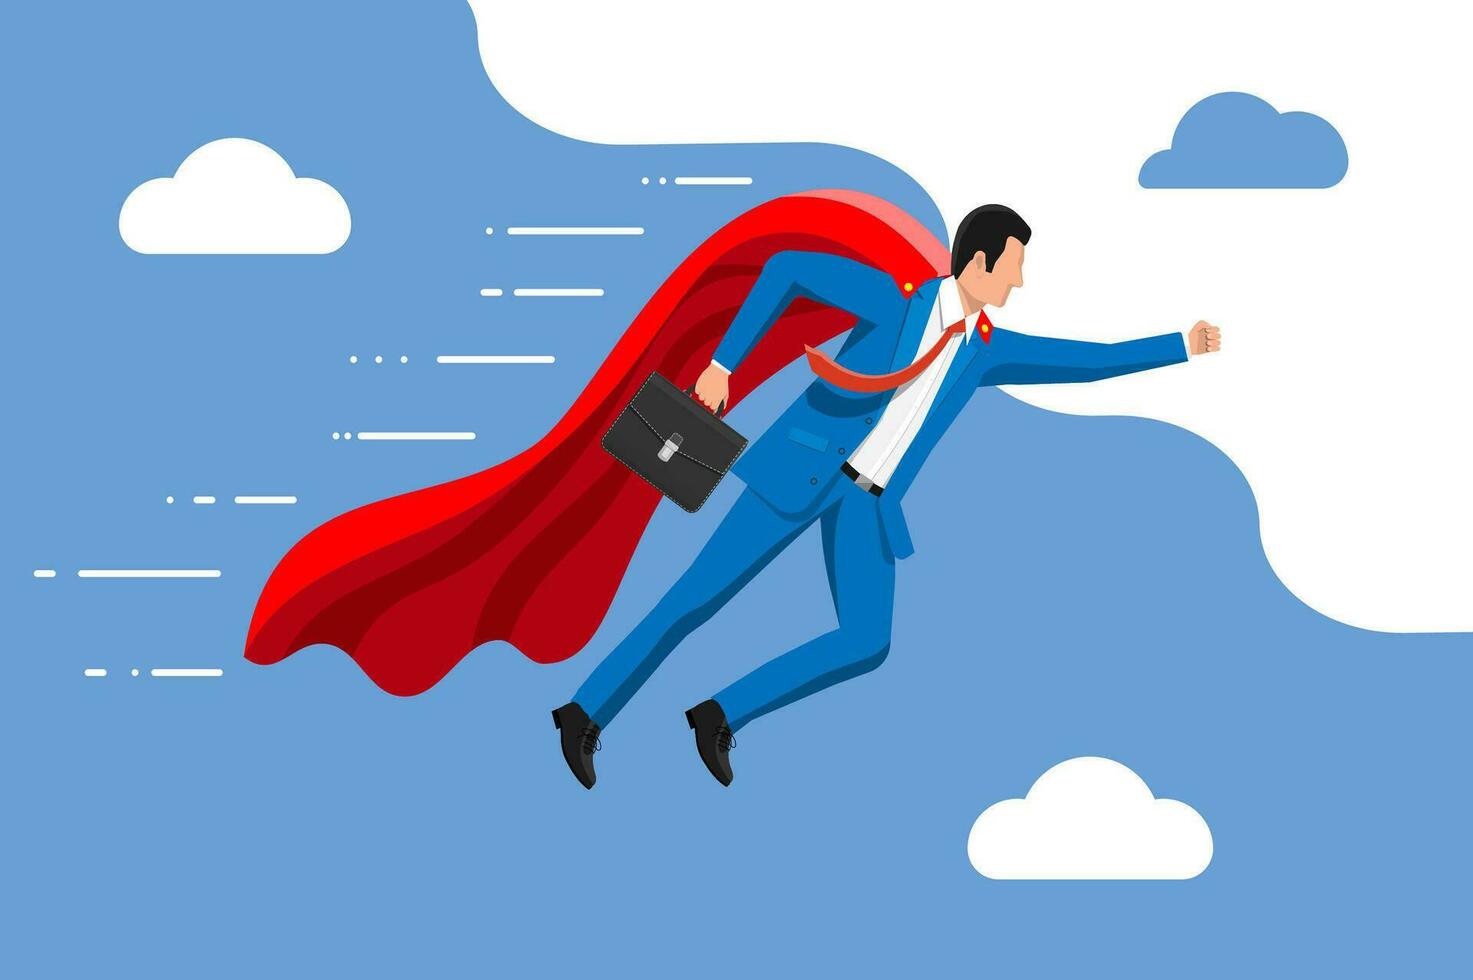 Superhero businessman flying in sky. Business man in suit and red cloak. Goal setting. Smart goal. Business target concept. Achievement and success. Vector illustration in flat style